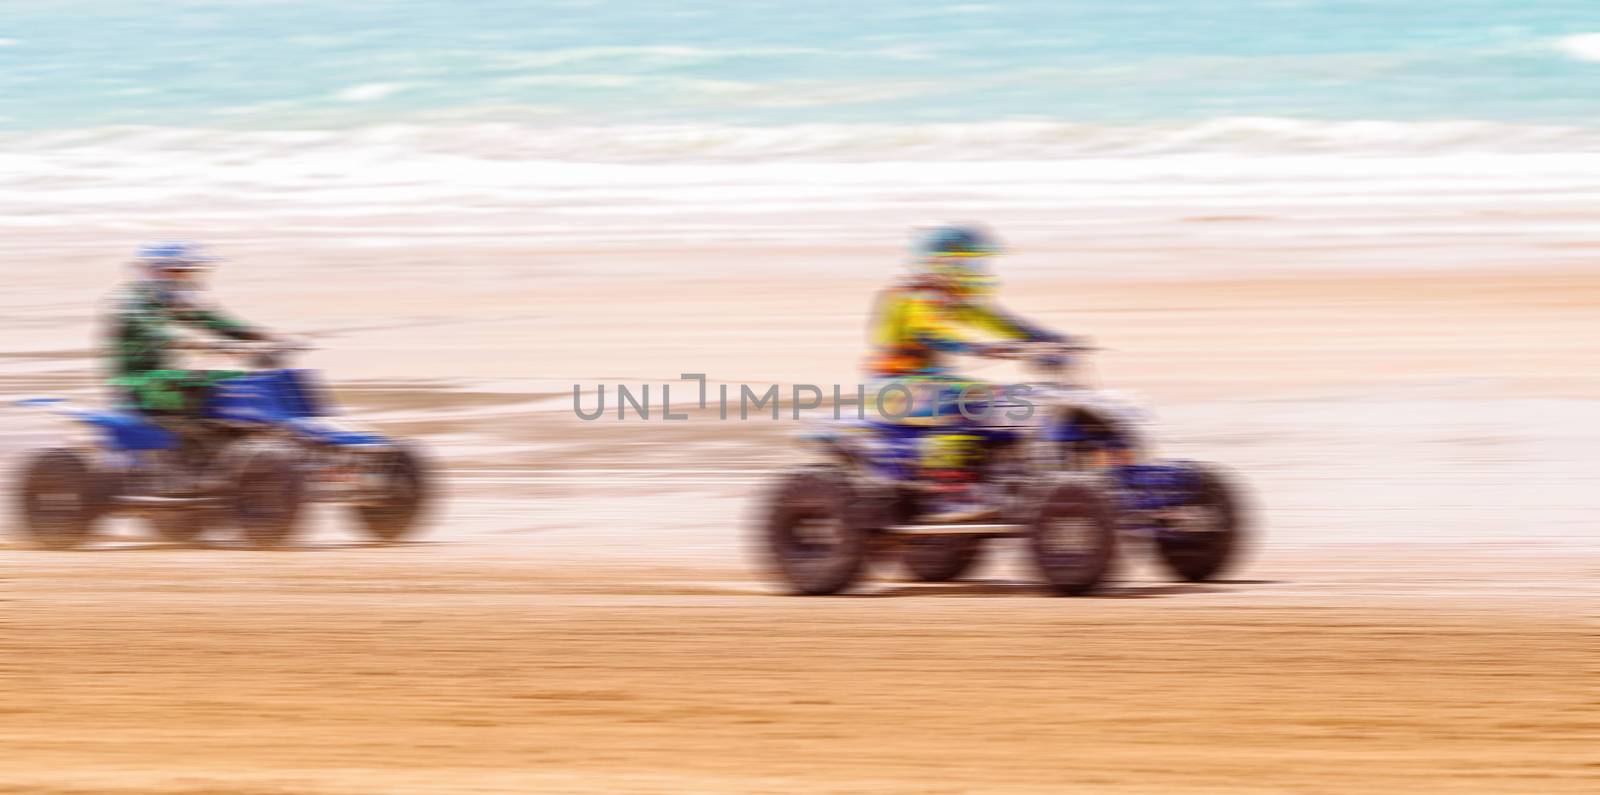 INTENTIONALLY BLURRED BY PANNING TO SHOW THE FAST SPEED MOTION OF Unidentified riders and bikes participating in motorcycle racing on a sandy beach